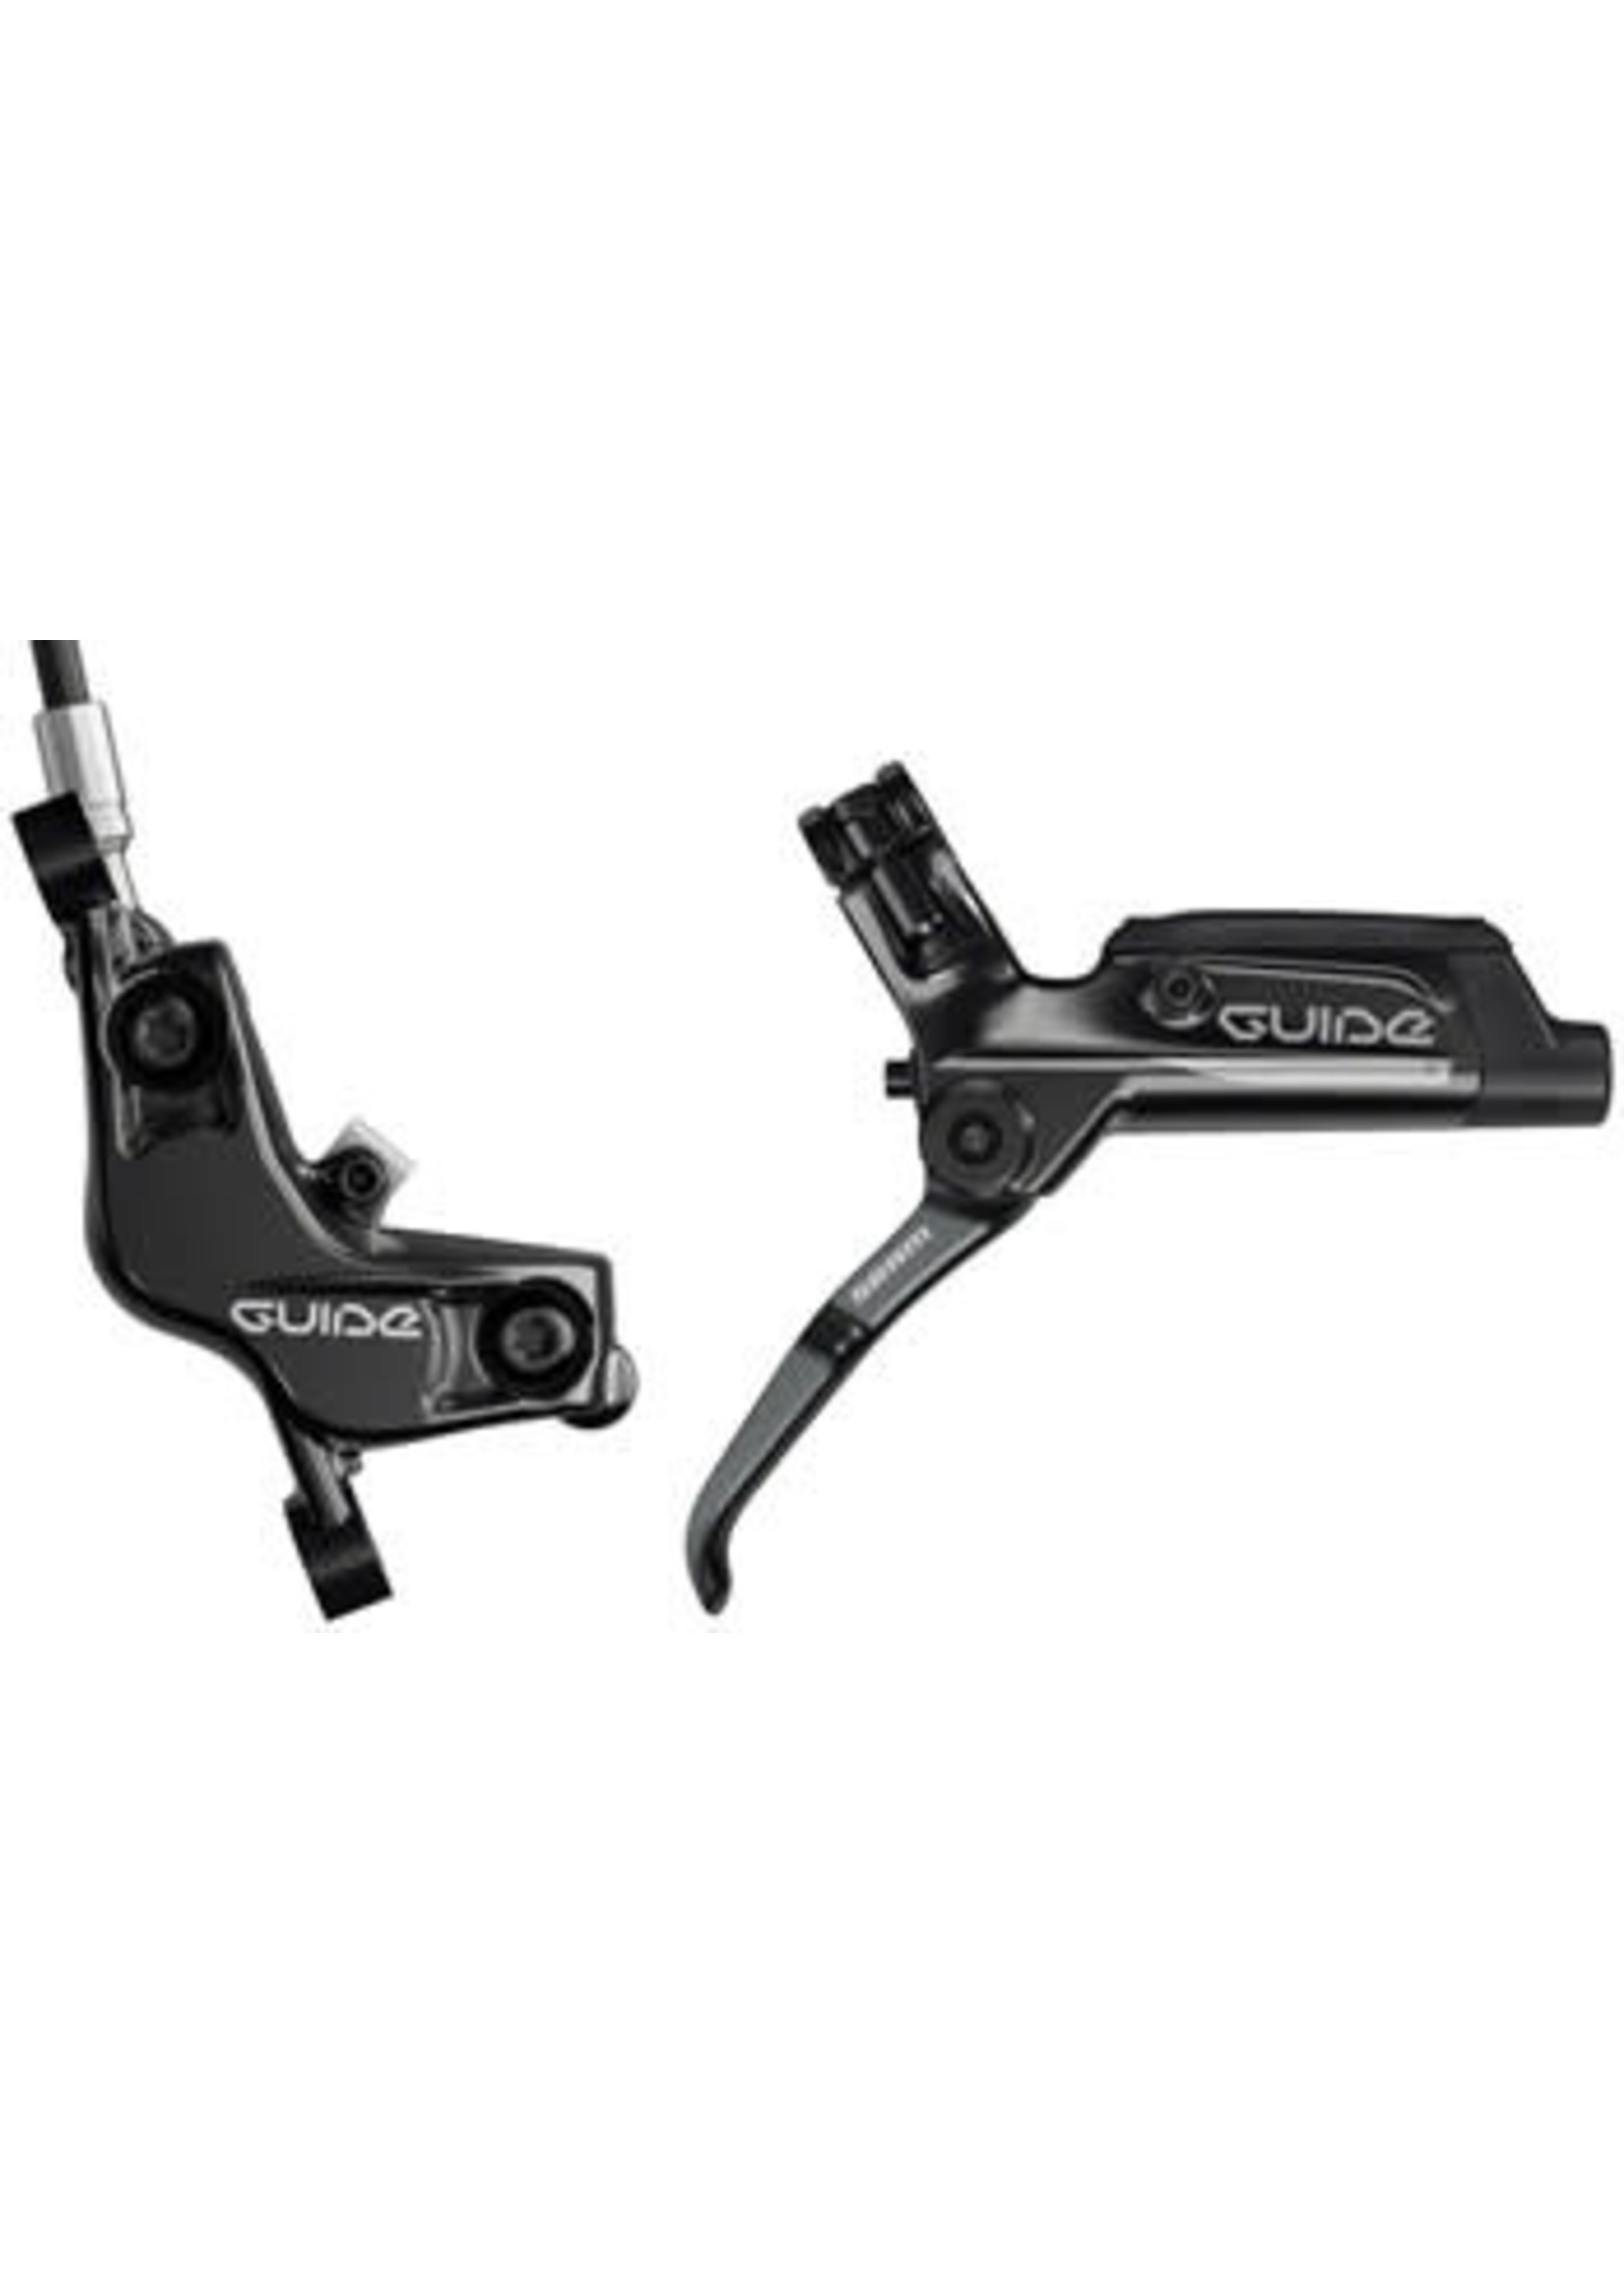 SRAM SRAM Guide T Disc Brake and Lever - Front Hydraulic Post Mount Black A1